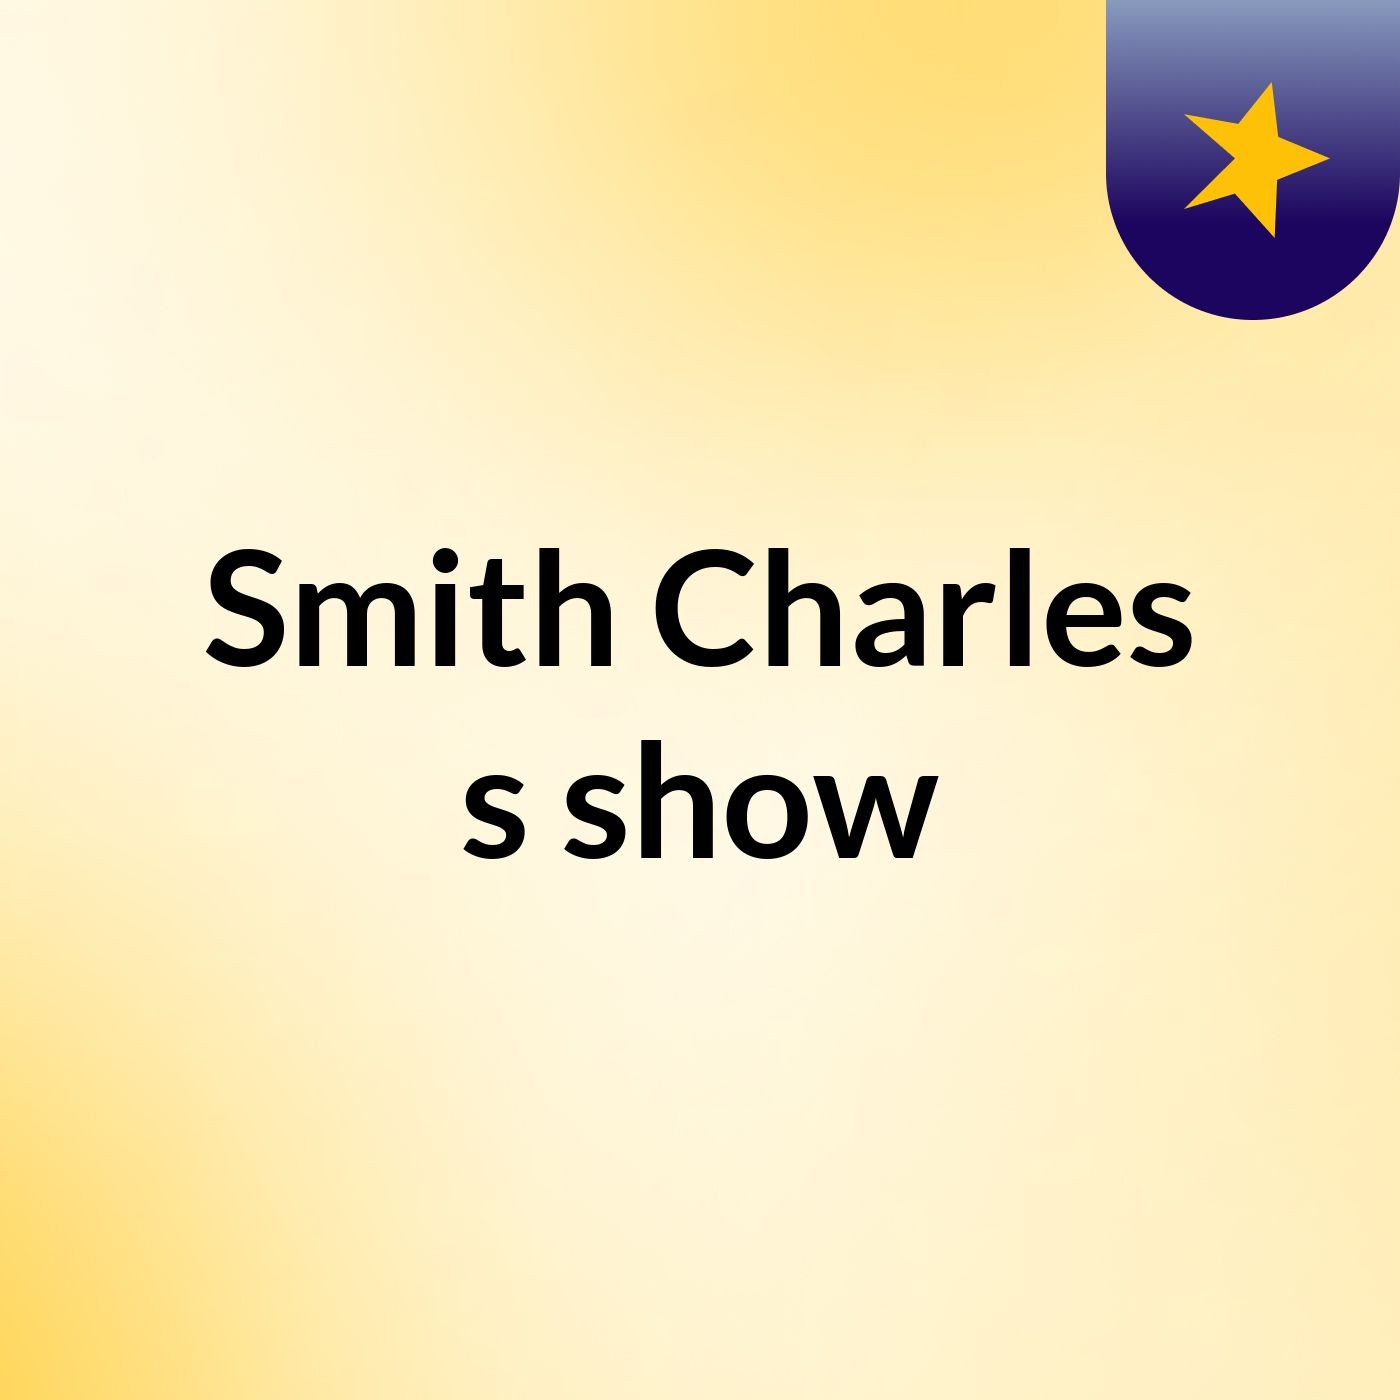 Smith Charles's show